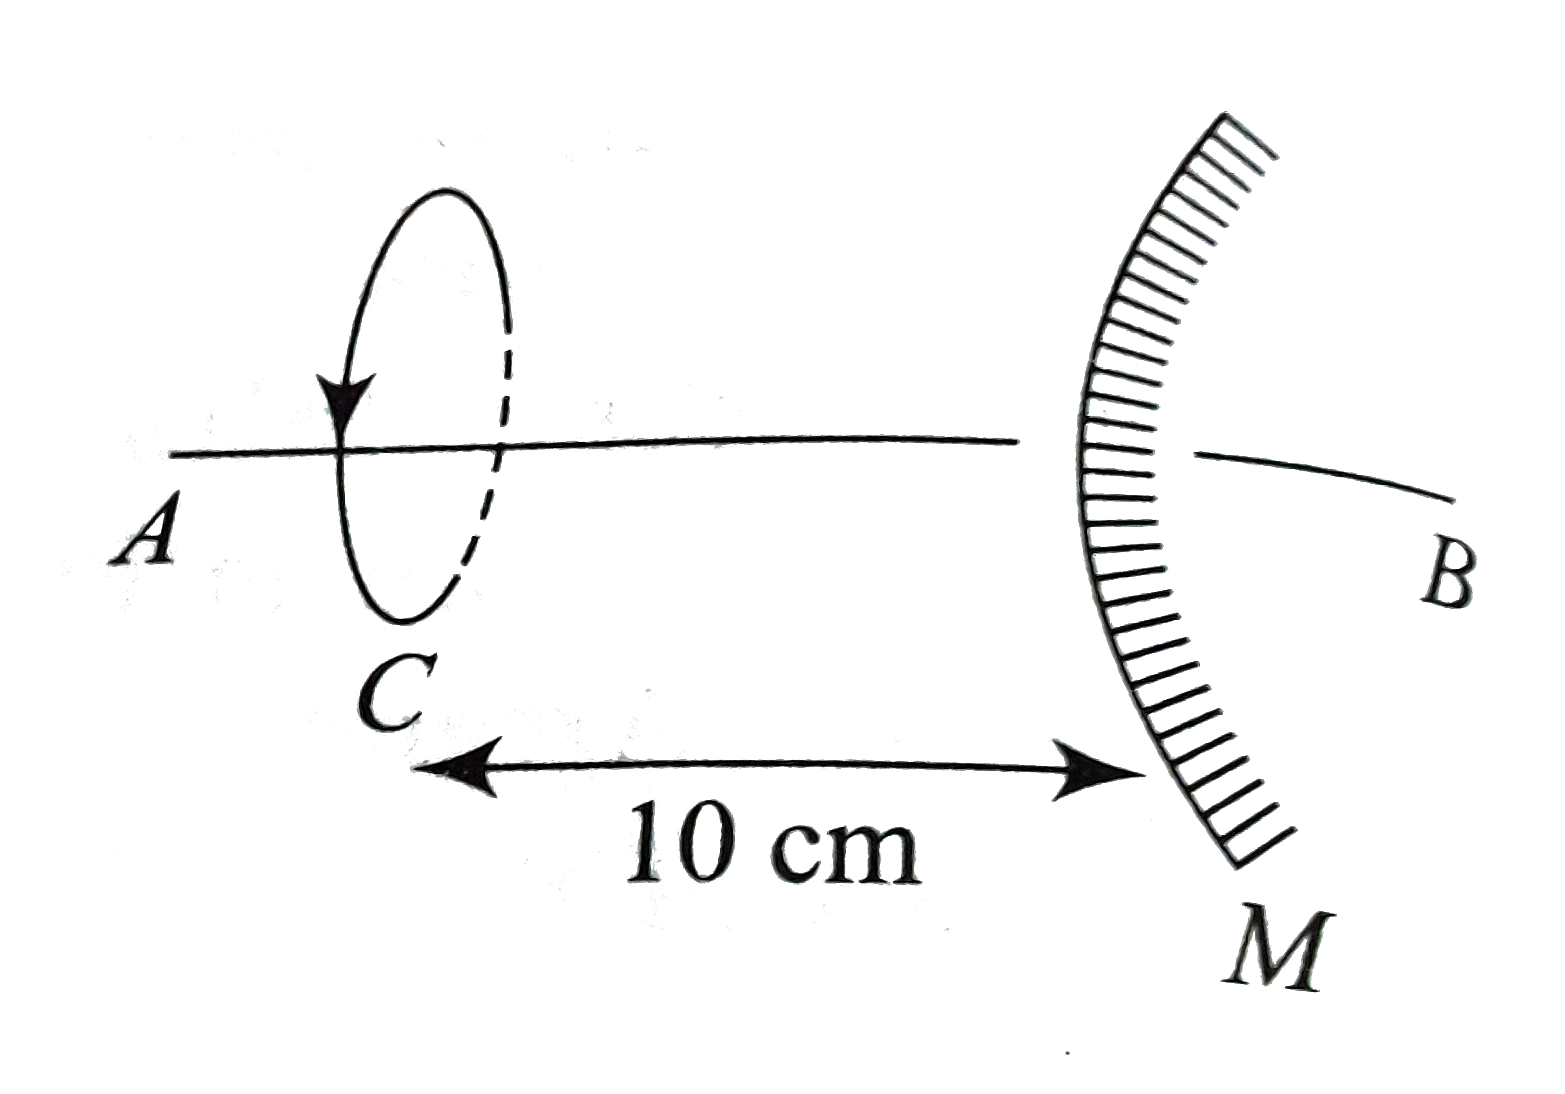 A partical revolves in clockwise direction (as seen from point A) in a circle C of radius 1 cm and completes one revolution in 2 sec. The axis of the circle and the principal axis of the mirror M coincides, call it AB. The radius of curvature of the mirror of 20cm. Then, the direction of revolution (as seen from A) of the image of the partical and its speed is